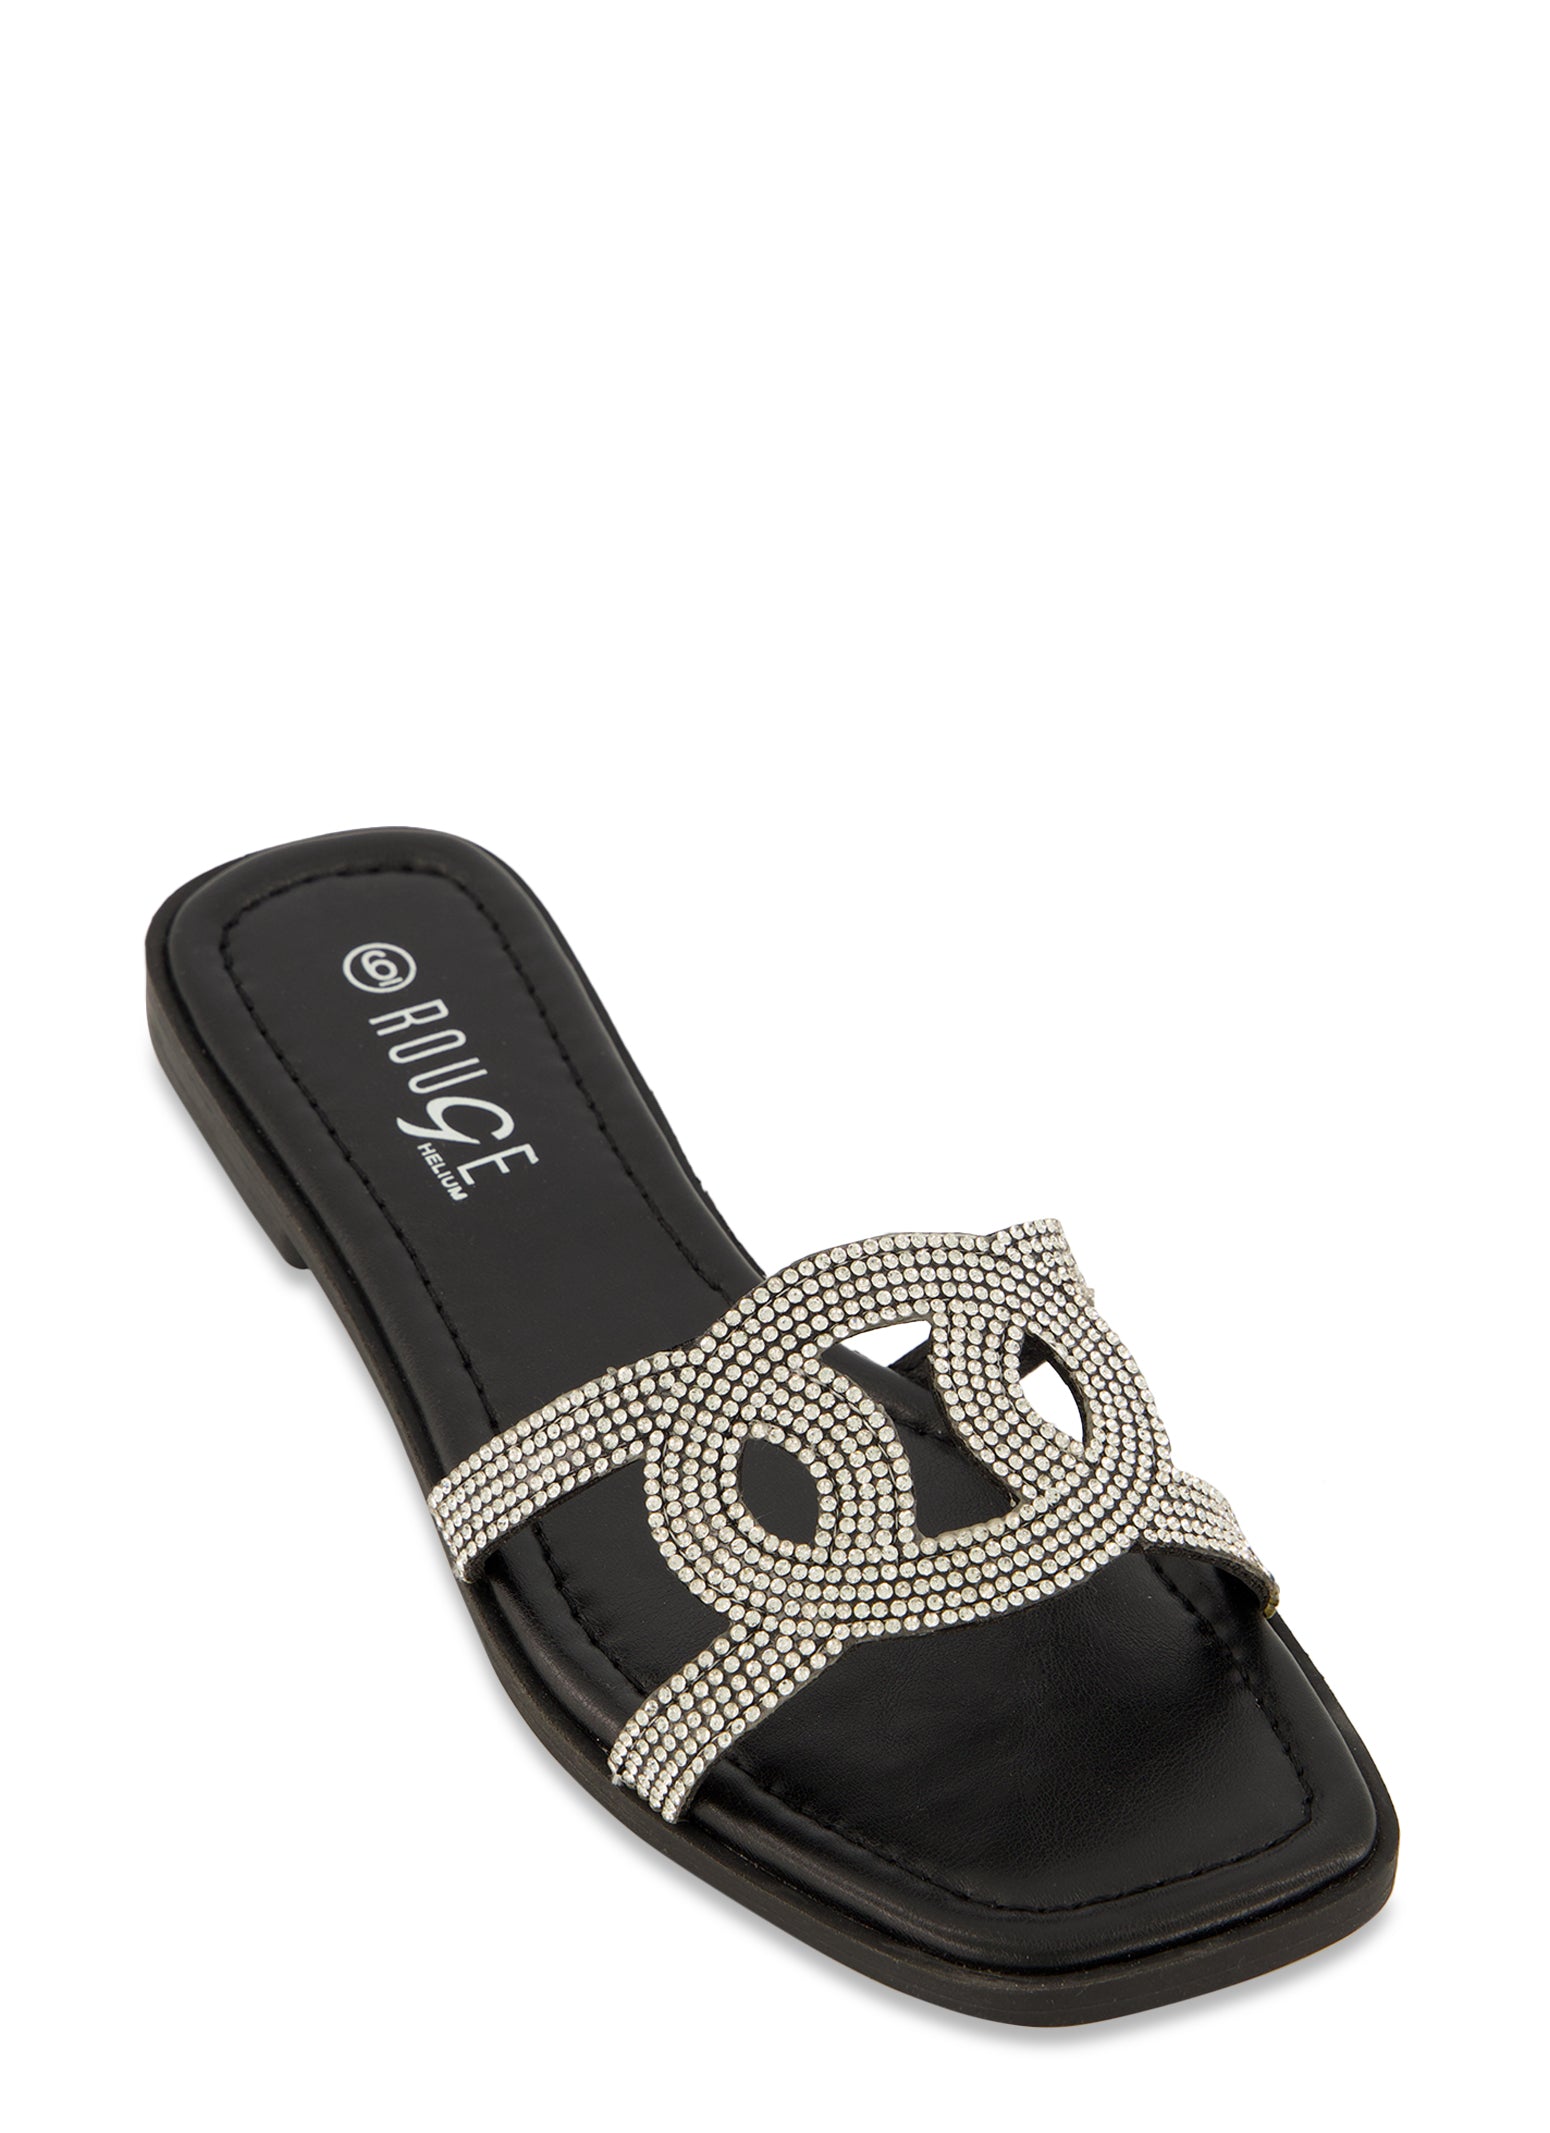 Chanel Woven Slides size 9  Black patent leather wedges, Trim